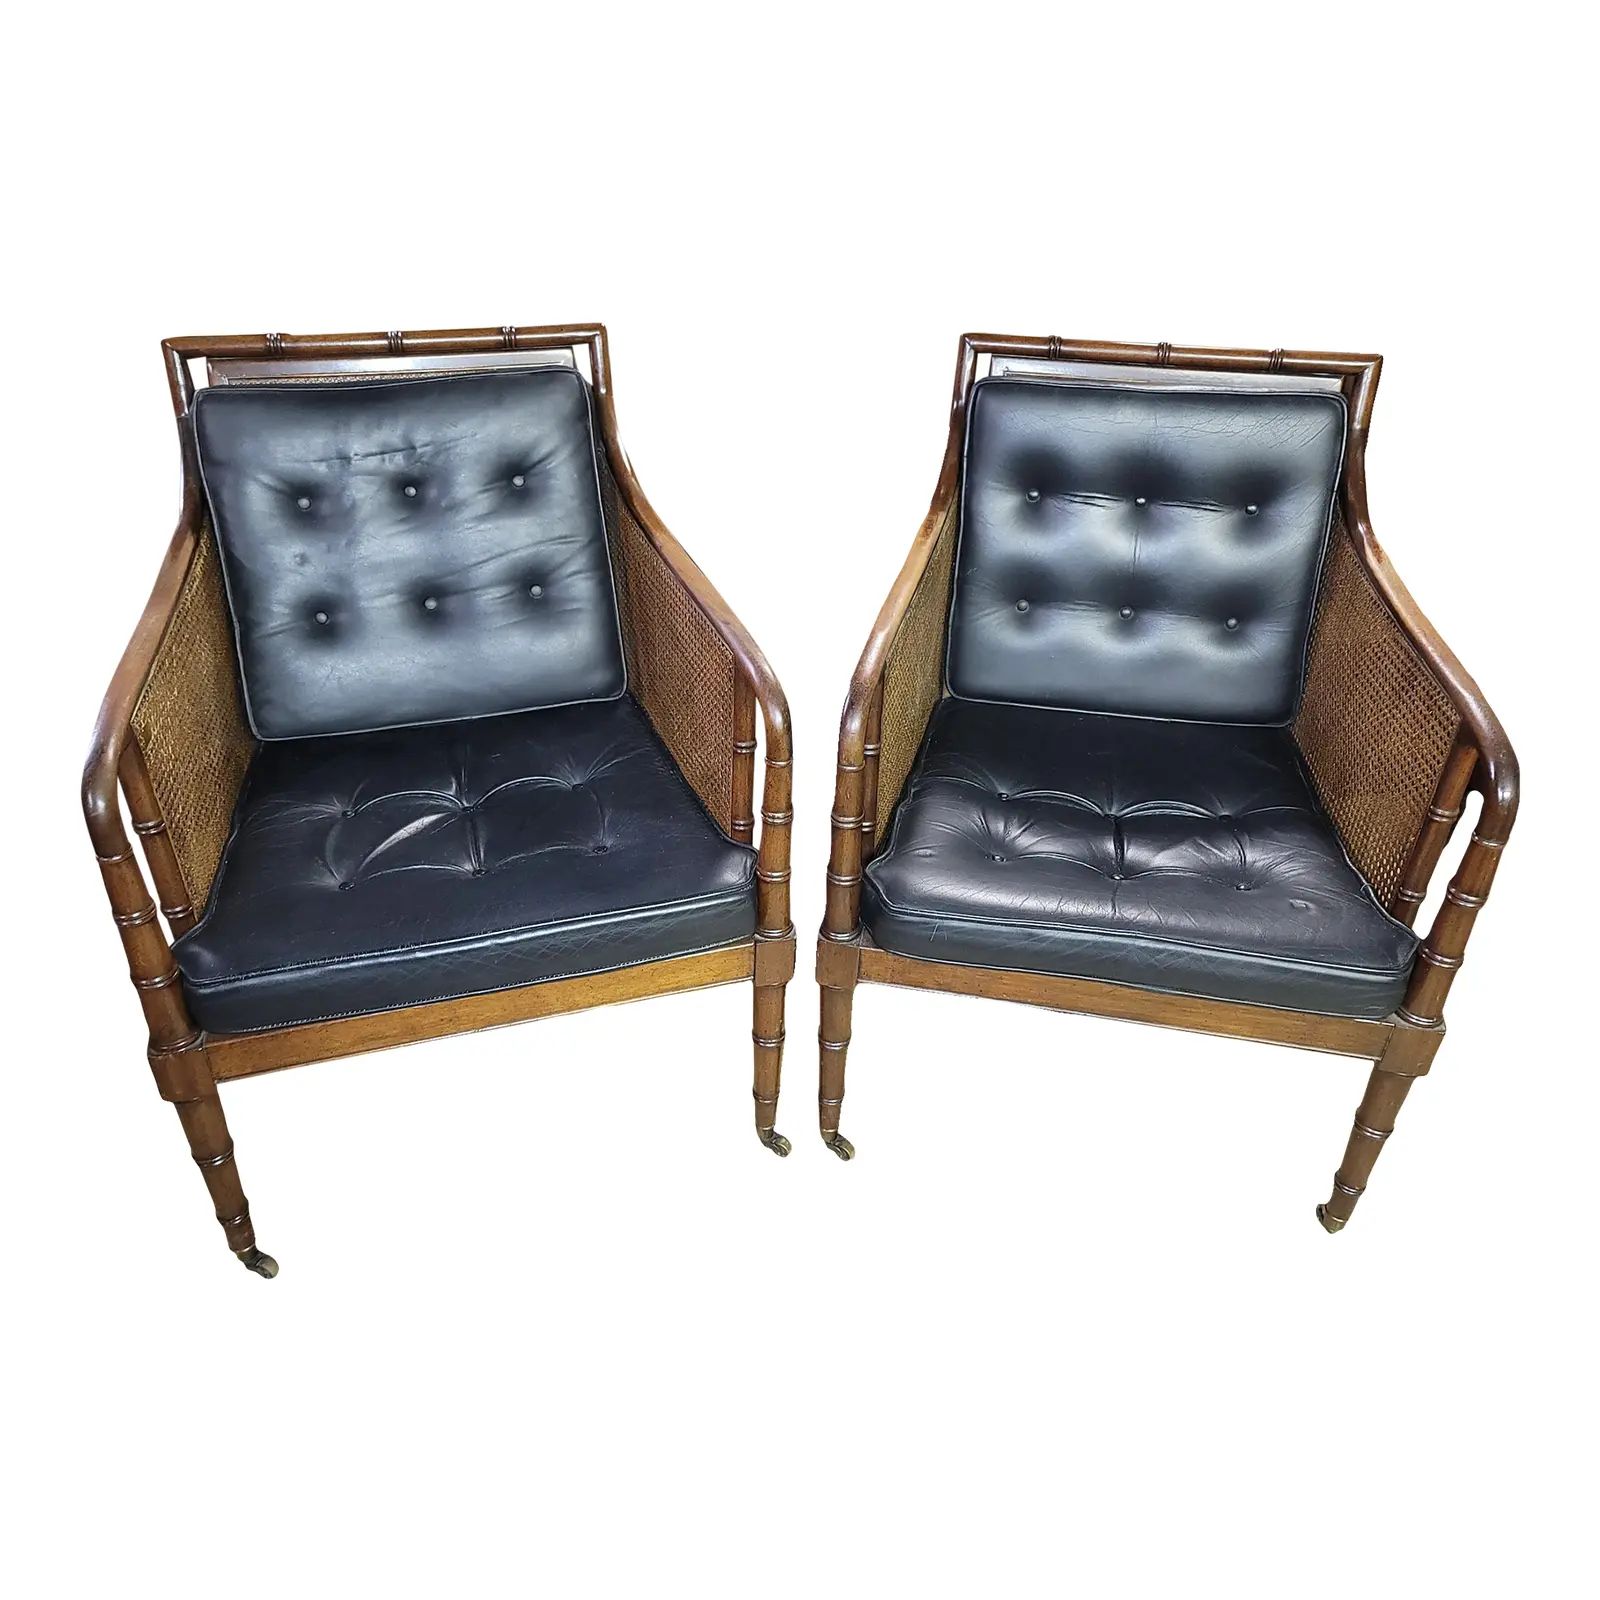 Pair of Vintage Hickory Chair Hollywood Regency Campaign Faux Bamboo Leather Armchairs | Chairish